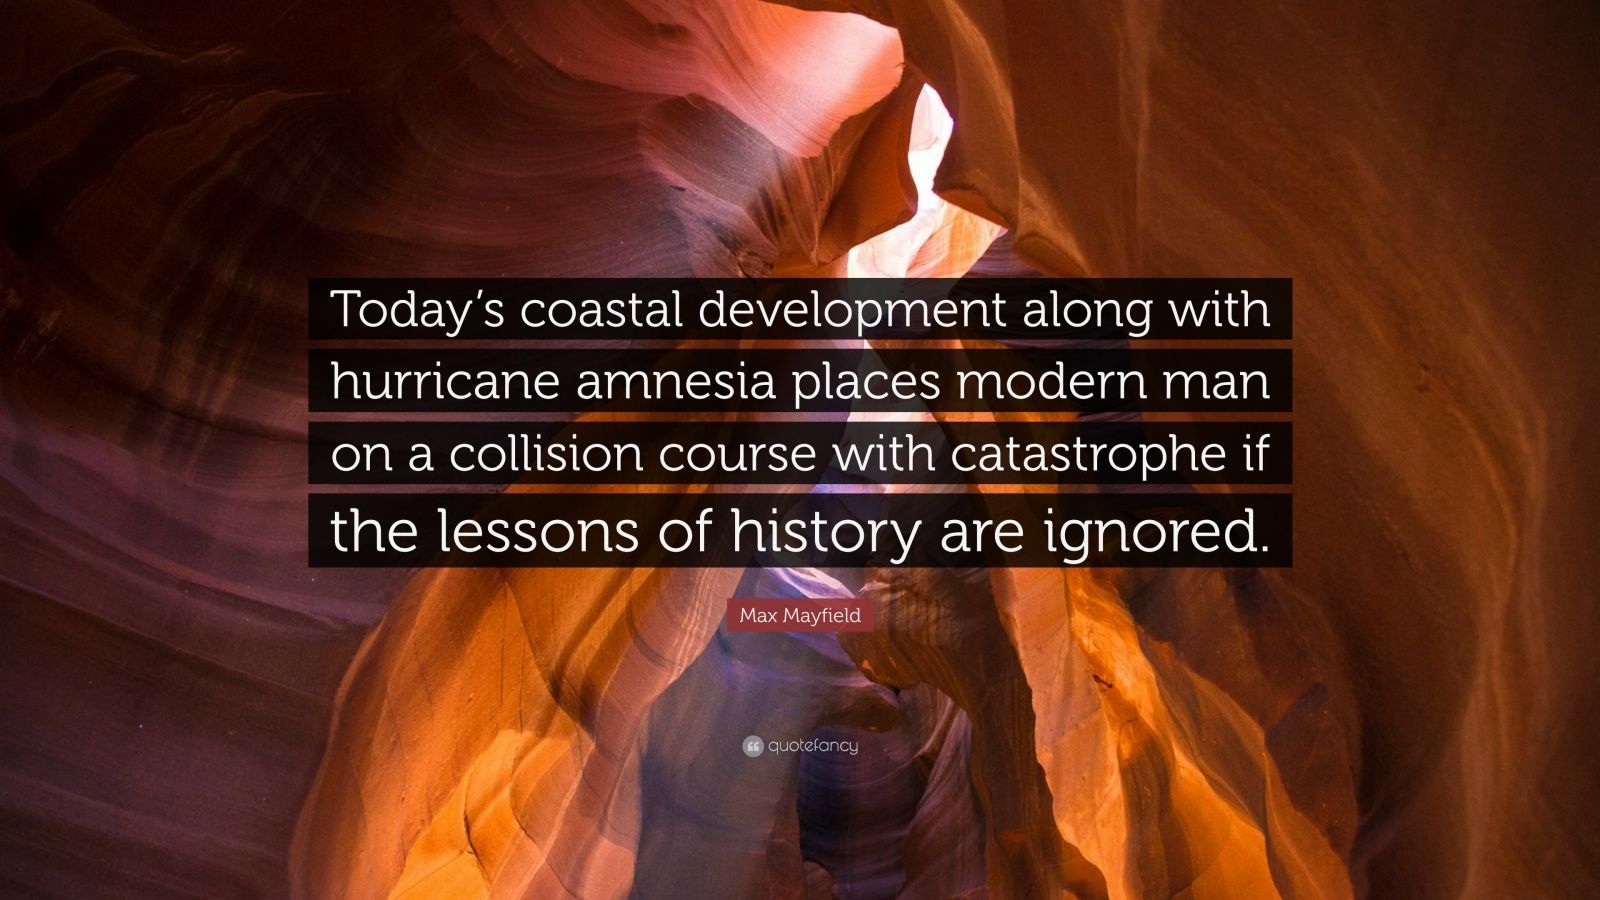 Max Mayfield Quote: “Today's coastal development along with hurricane amnesia places modern man on a collision course with catastrophe if the.” (7 wallpaper)